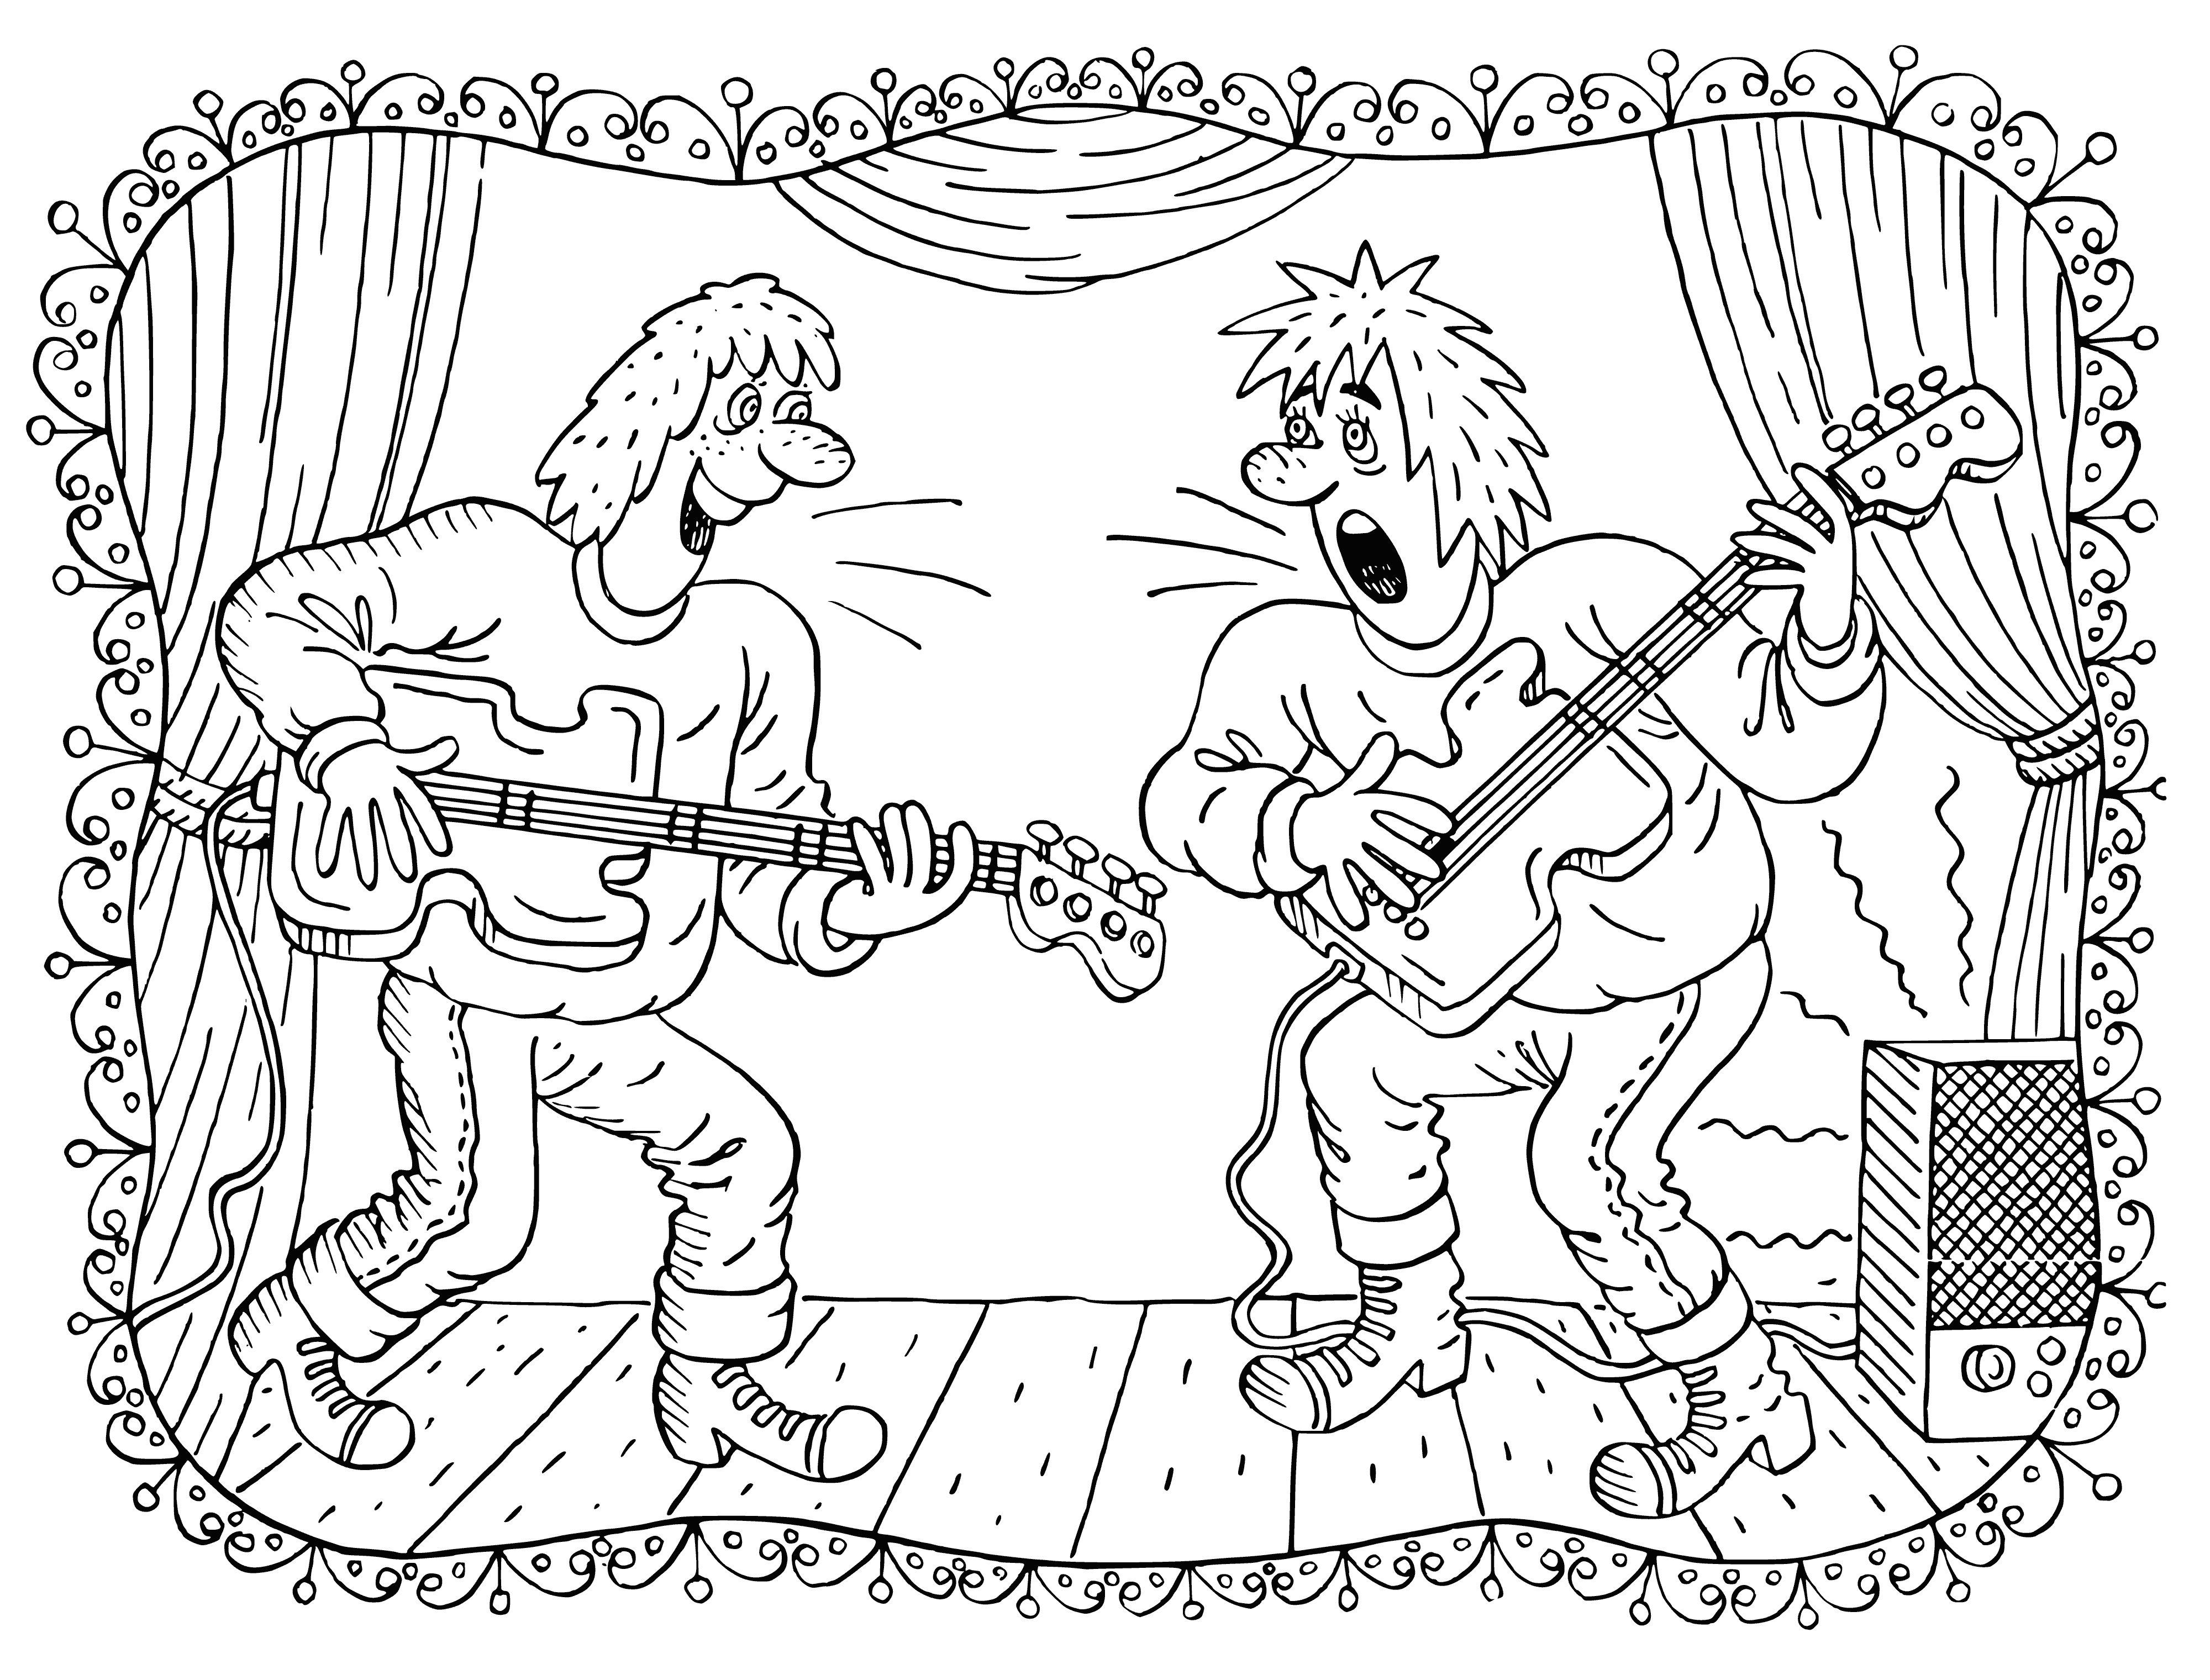 Guitarists coloring page